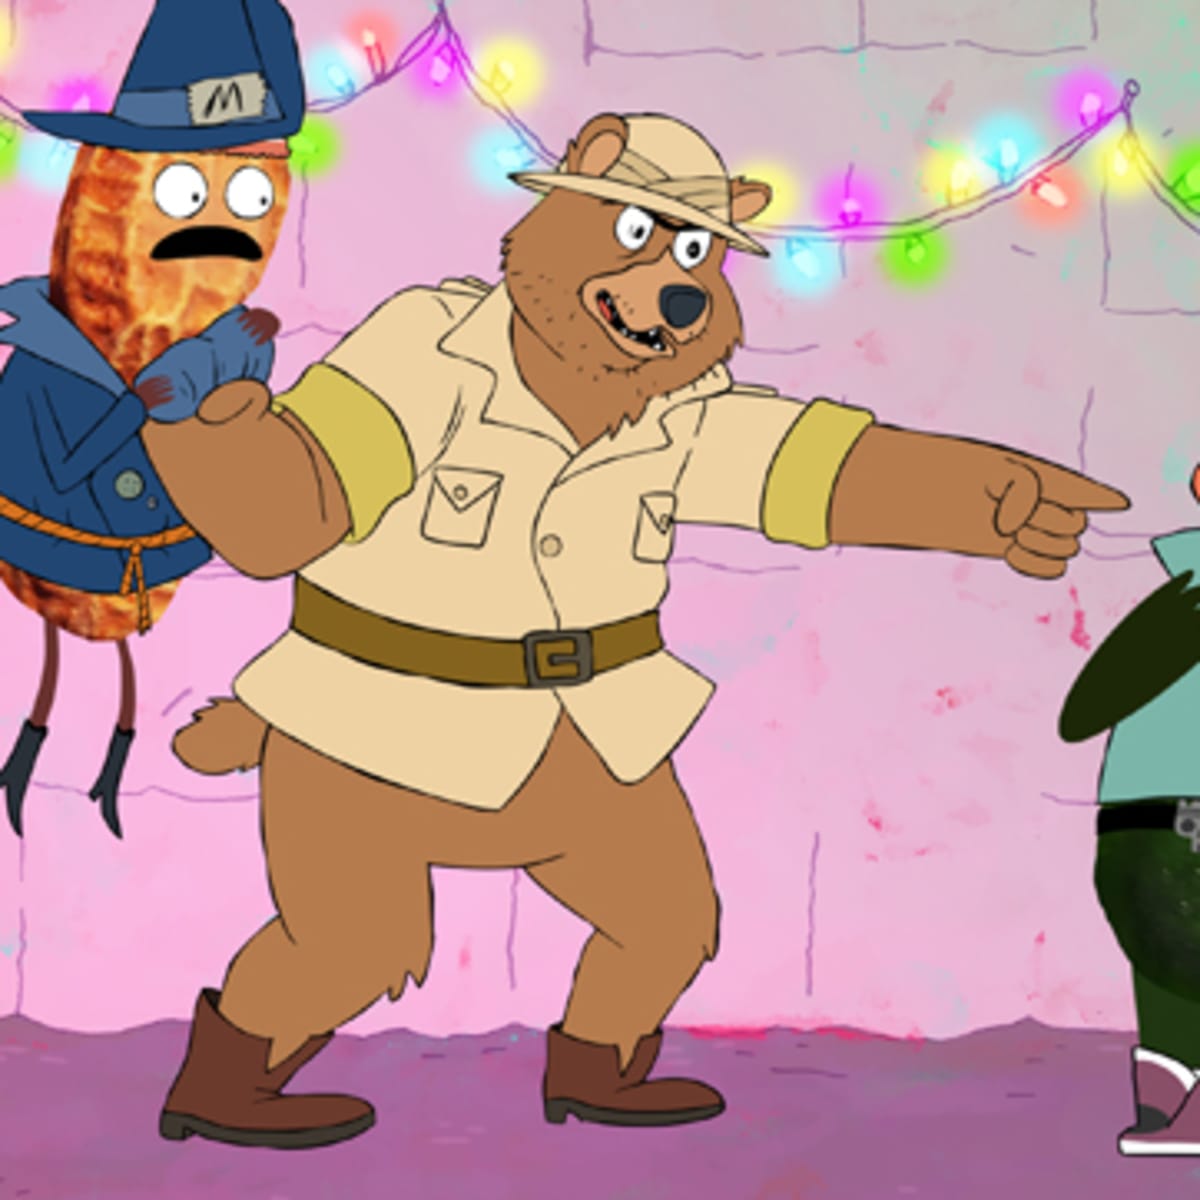 90s Nba Superstar Shaq Animated As 90s Superstar Bear On Disney Xd Show Si Kids Sports News For Kids Kids Games And More